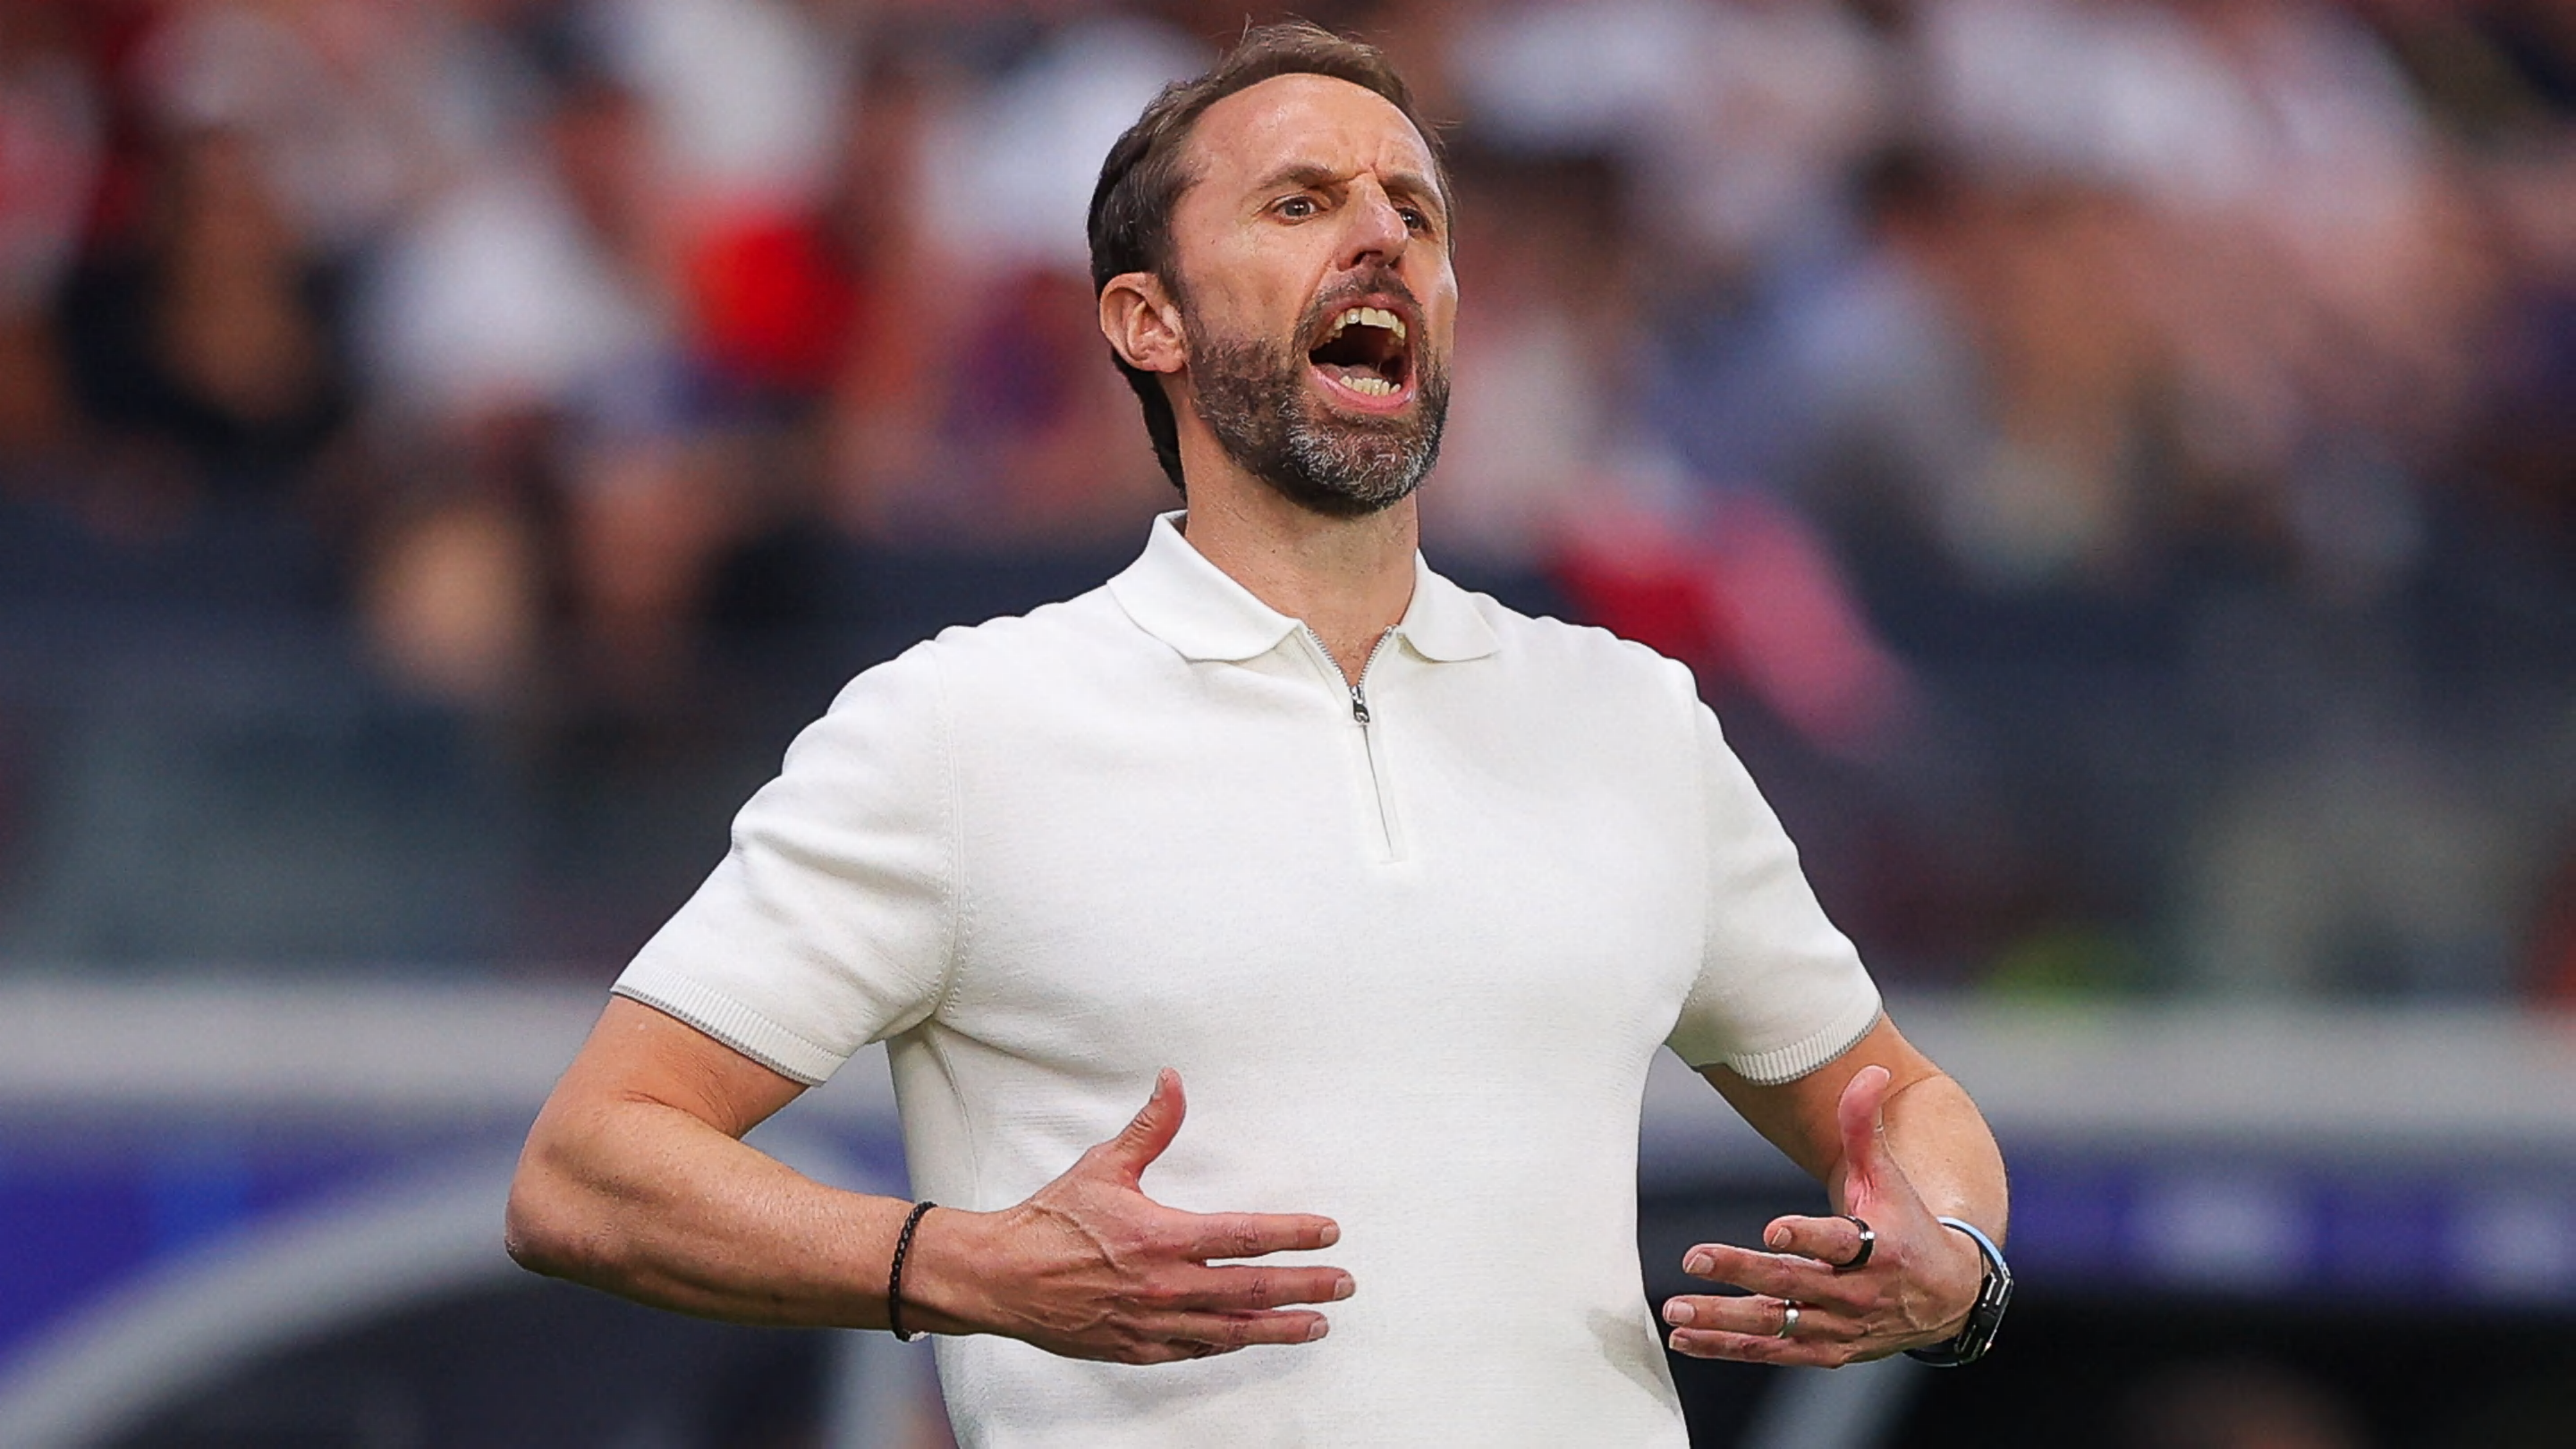 Gareth Southgate told 'England were s**t' in brutal assessment of Denmark draw